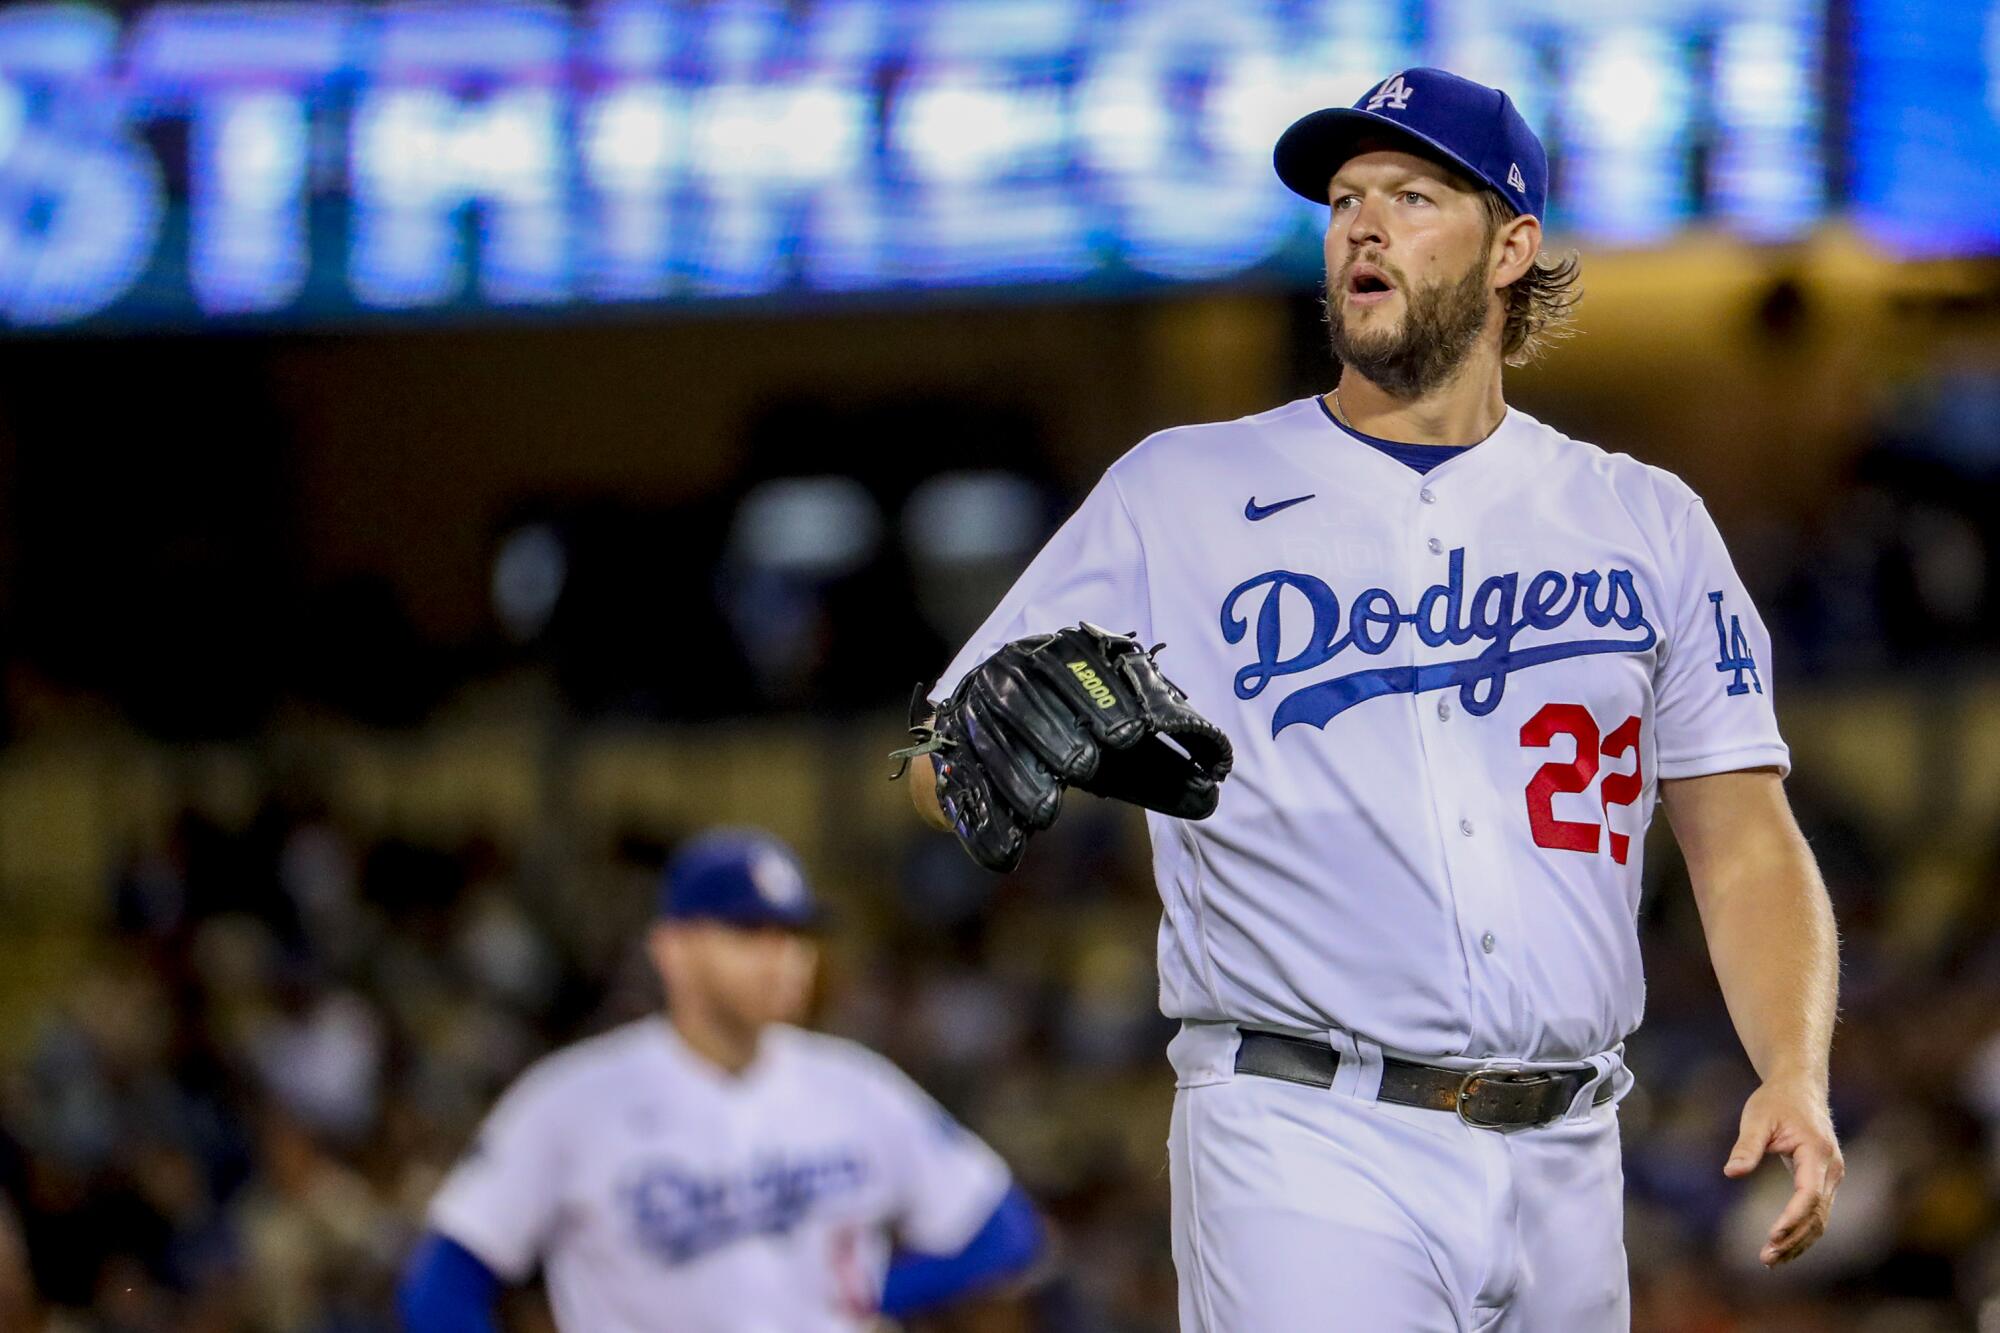 Dodgers starting pitcher Clayton Kershaw walks back to the mound after striking out a batter against the Diamondbacks